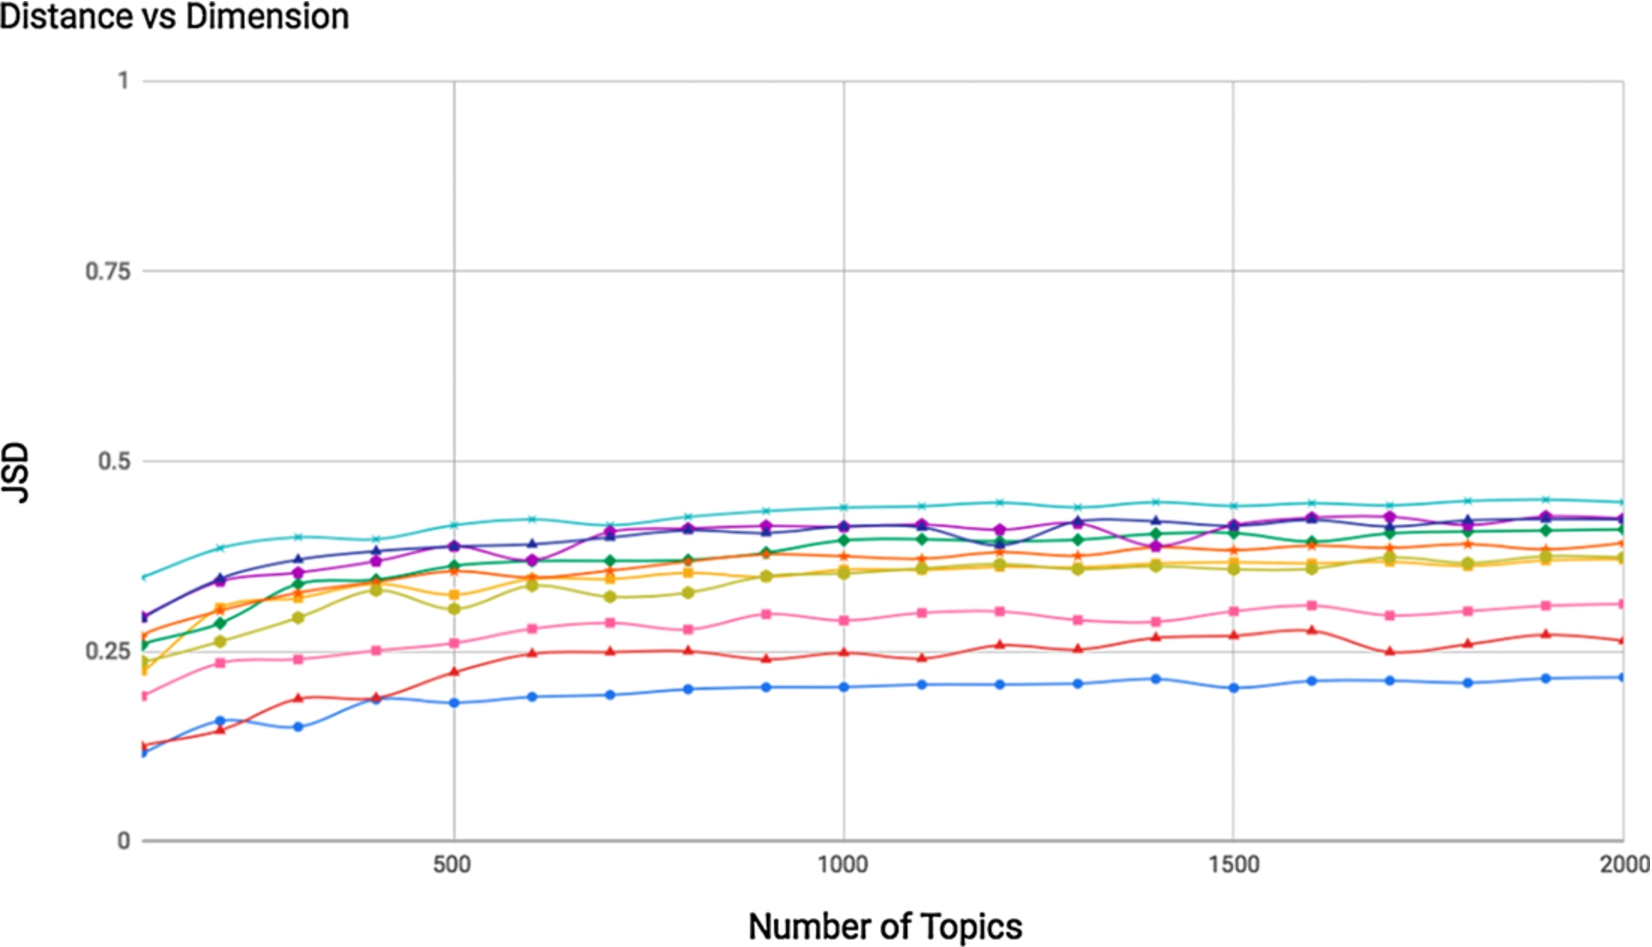 Distance values based on JS-divergence between 10 pair of documents from topic models with 100-to-2000 dimensions.